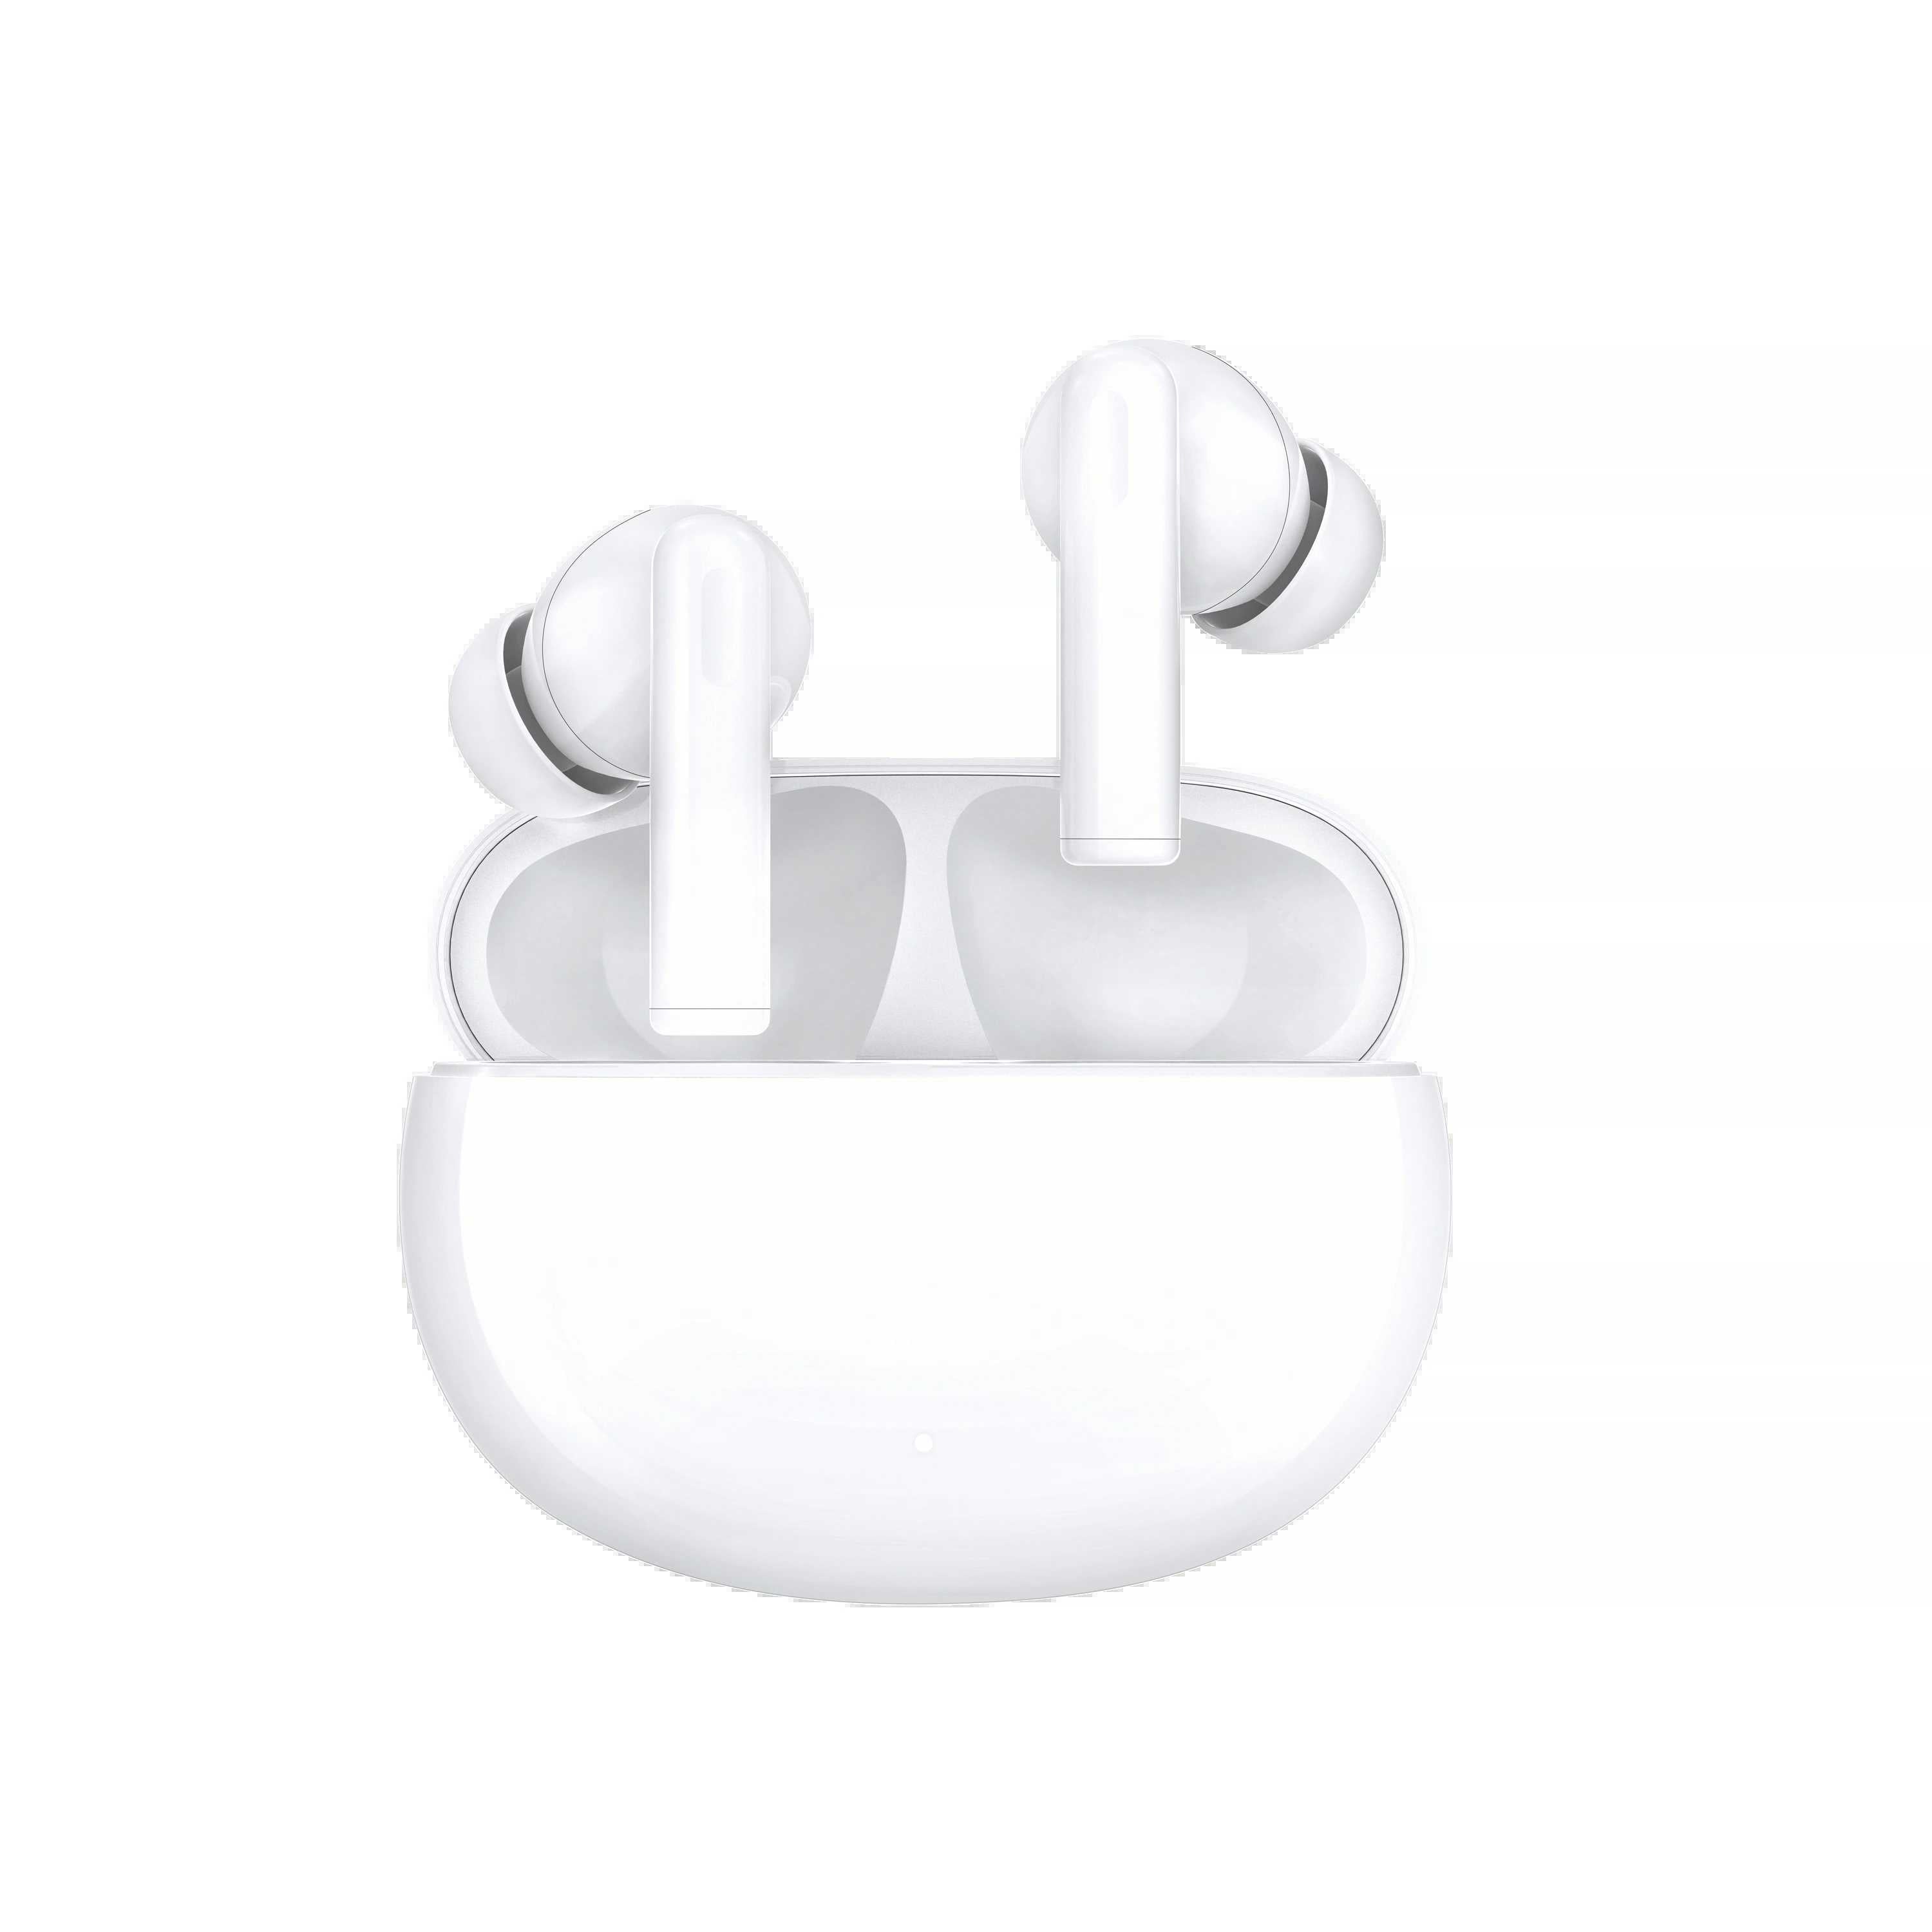 HONOR CHOICE Earbuds X5 - HONOR STORE Chile